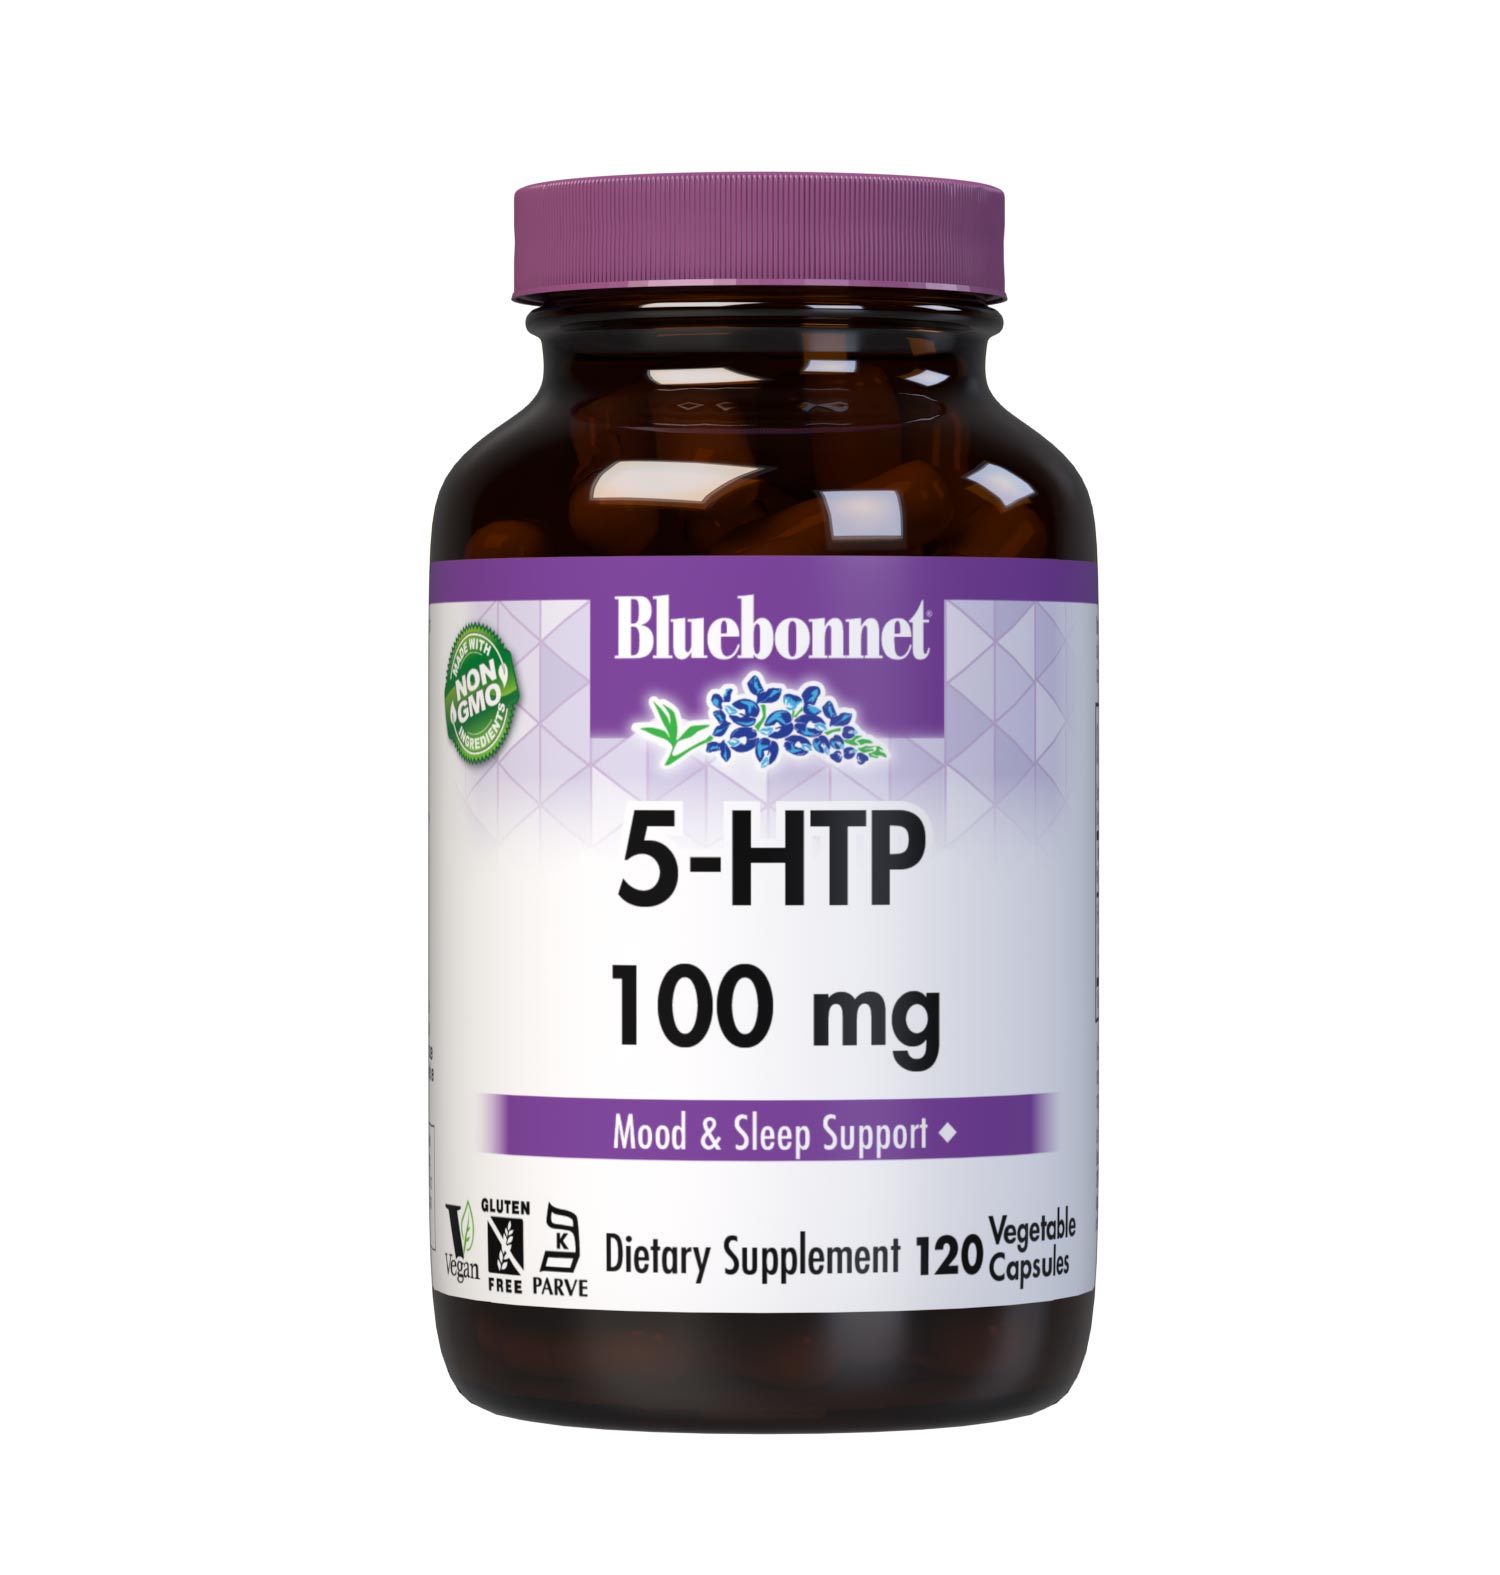 Bluebonnet's 5-HTP 100 mg 120 vegetable Capsules are formulated to help support healthy weight management, mood, relaxation, and occasional sleeplessness with 5-hydroxytryptophan from Griffonia simplicifolia. Guaranteed free of Peak-X. #size_120 count